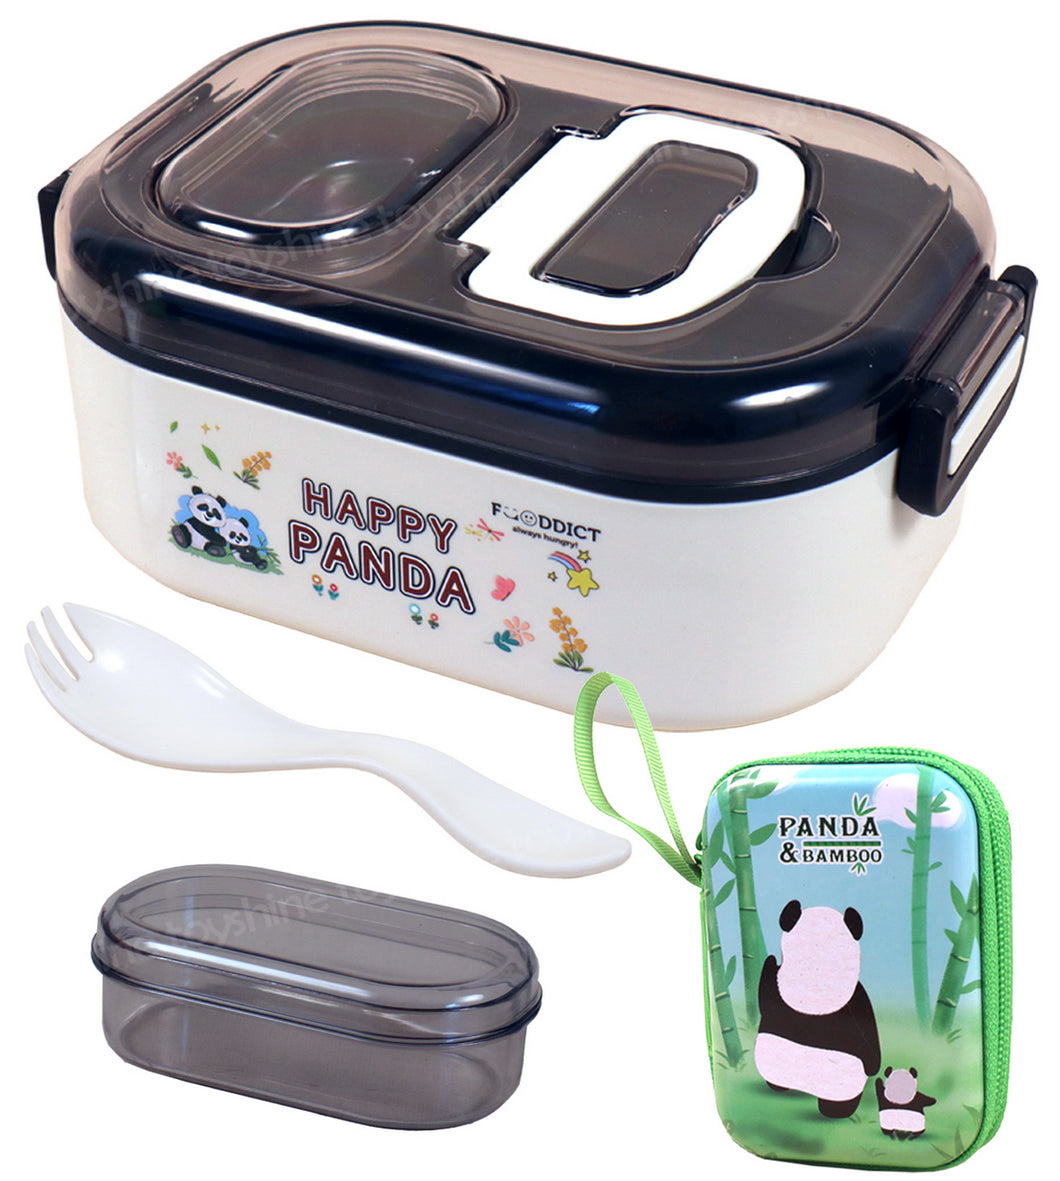 Spanker Panda Lunch Box Thermal Stainless Steel 1000 ML Insulation Brunch Munch Box Tableware Set Portable Lunch Containers for Kid Adult Student Children Keep Food